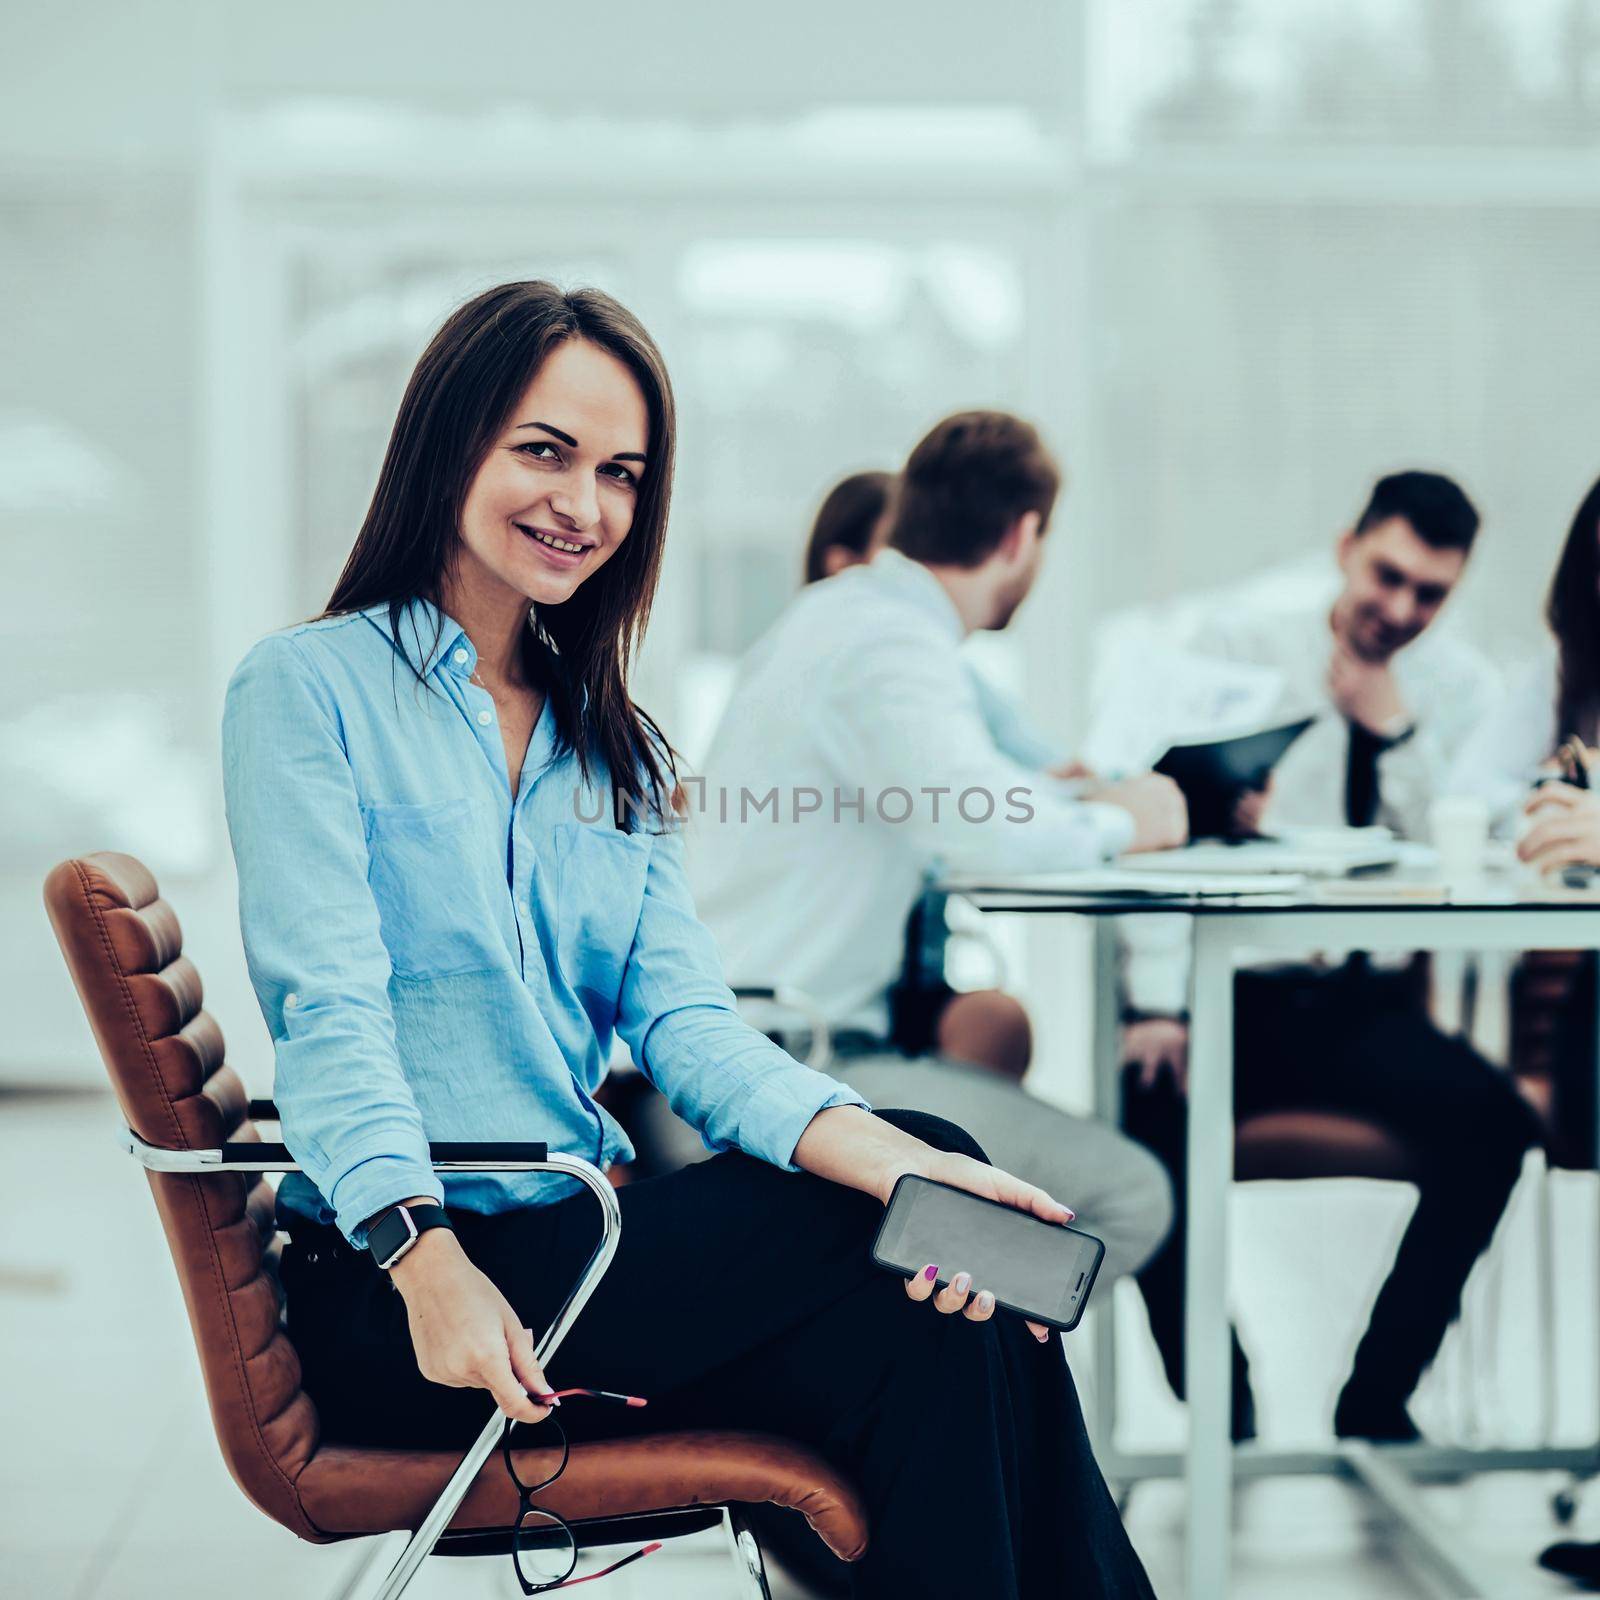 leading lawyer of the company on background, business meeting business partners. the photo has a empty space for your text.